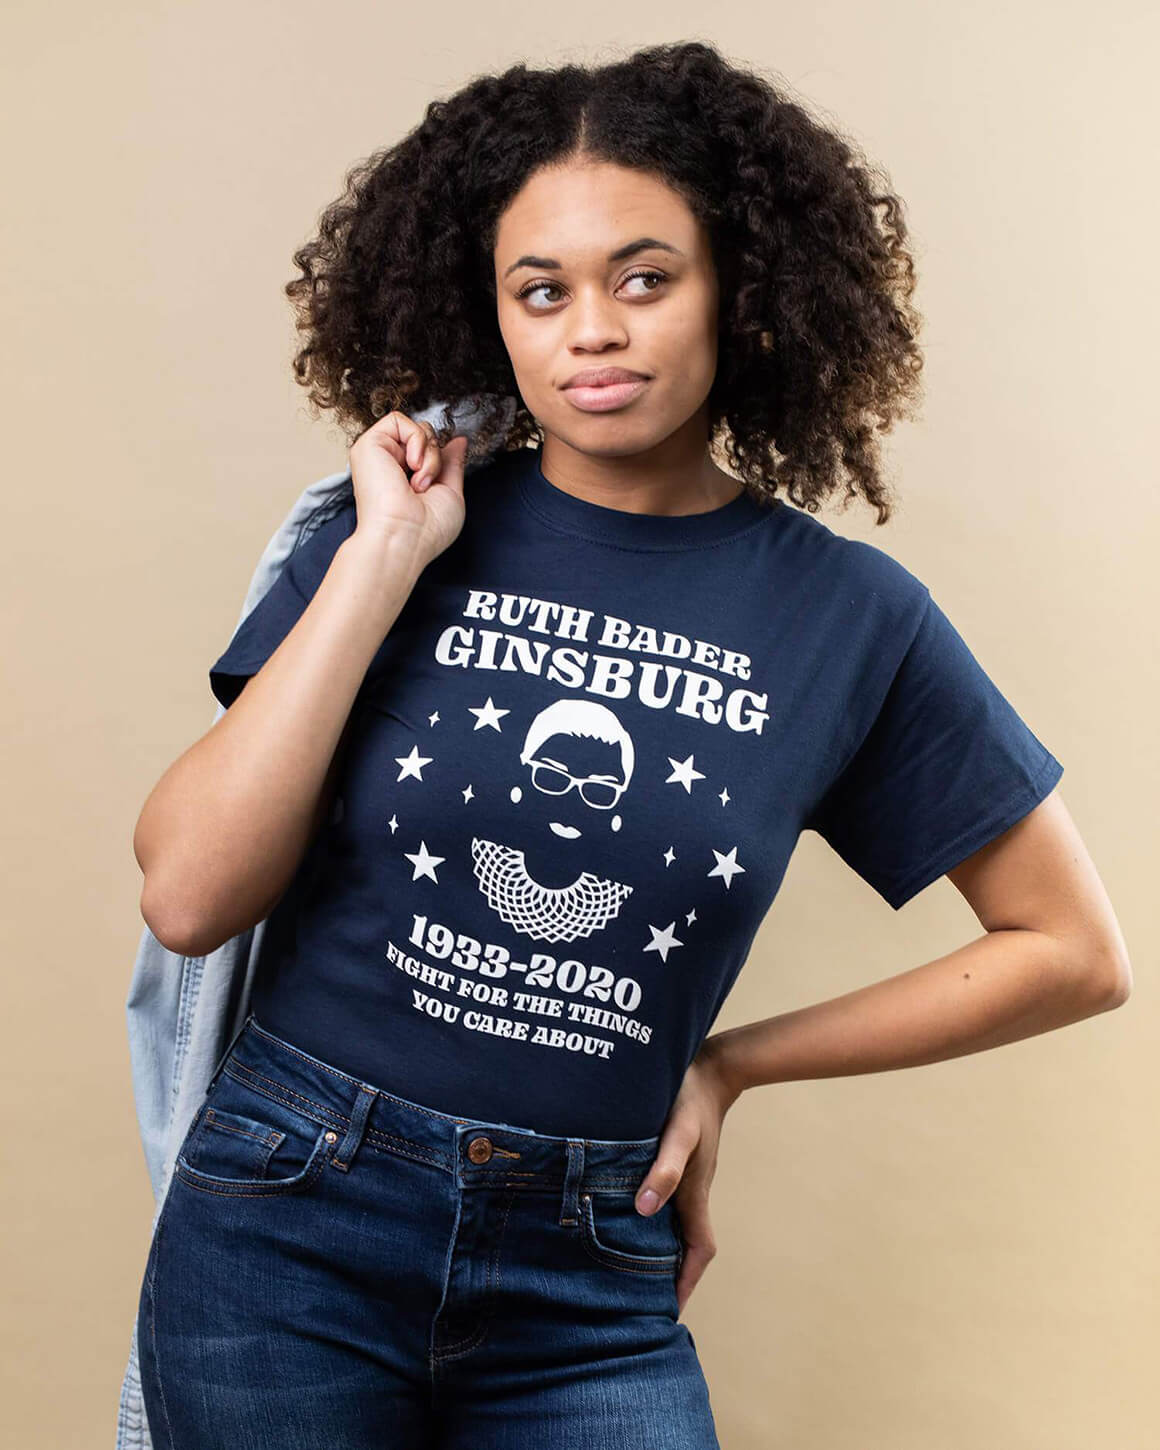 Young woman smiling wearing RBG fight for the things you care about shirt